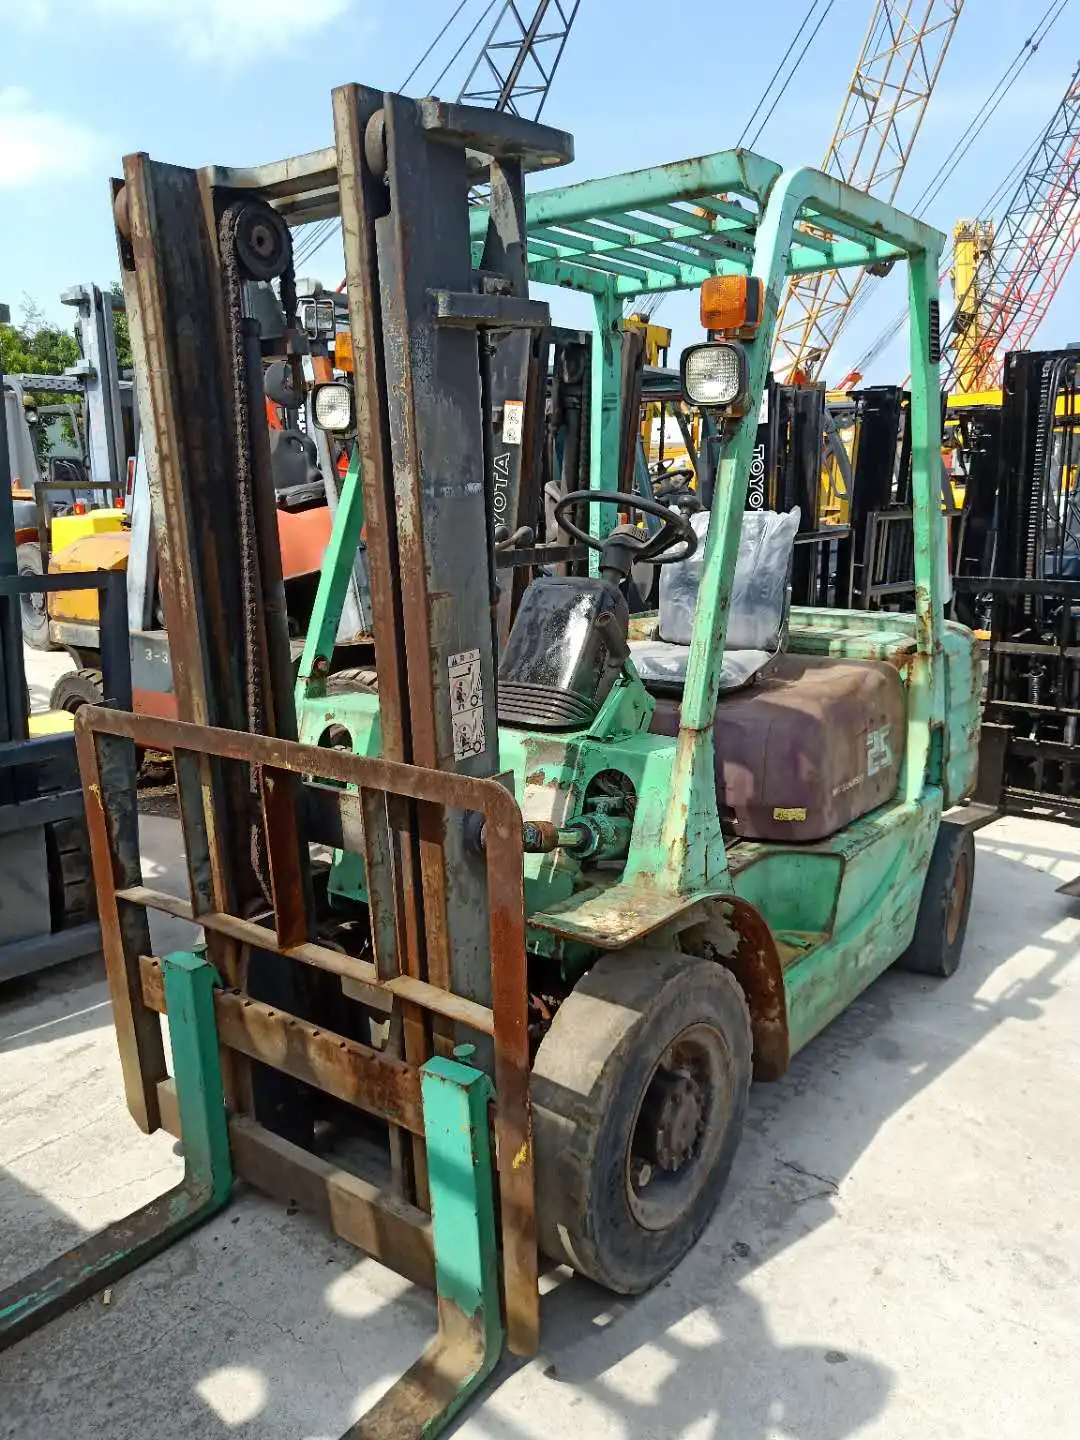 toyota forklift used